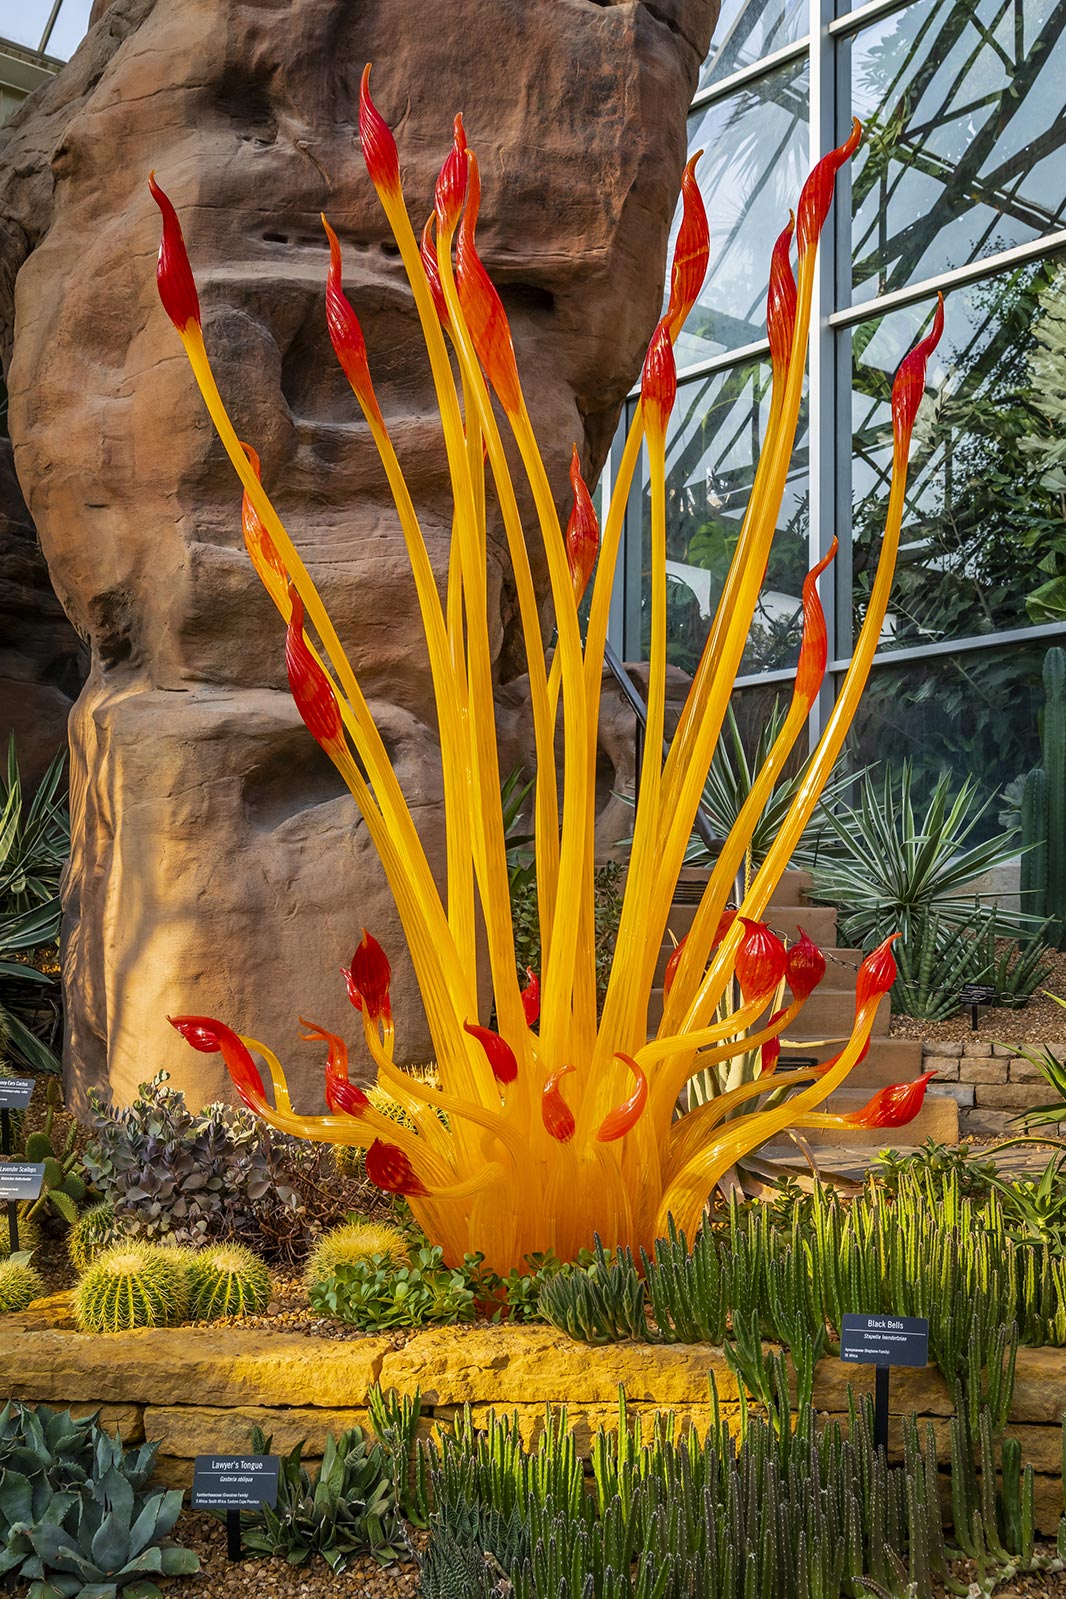 Torchier (1997) by Dale Chihuly